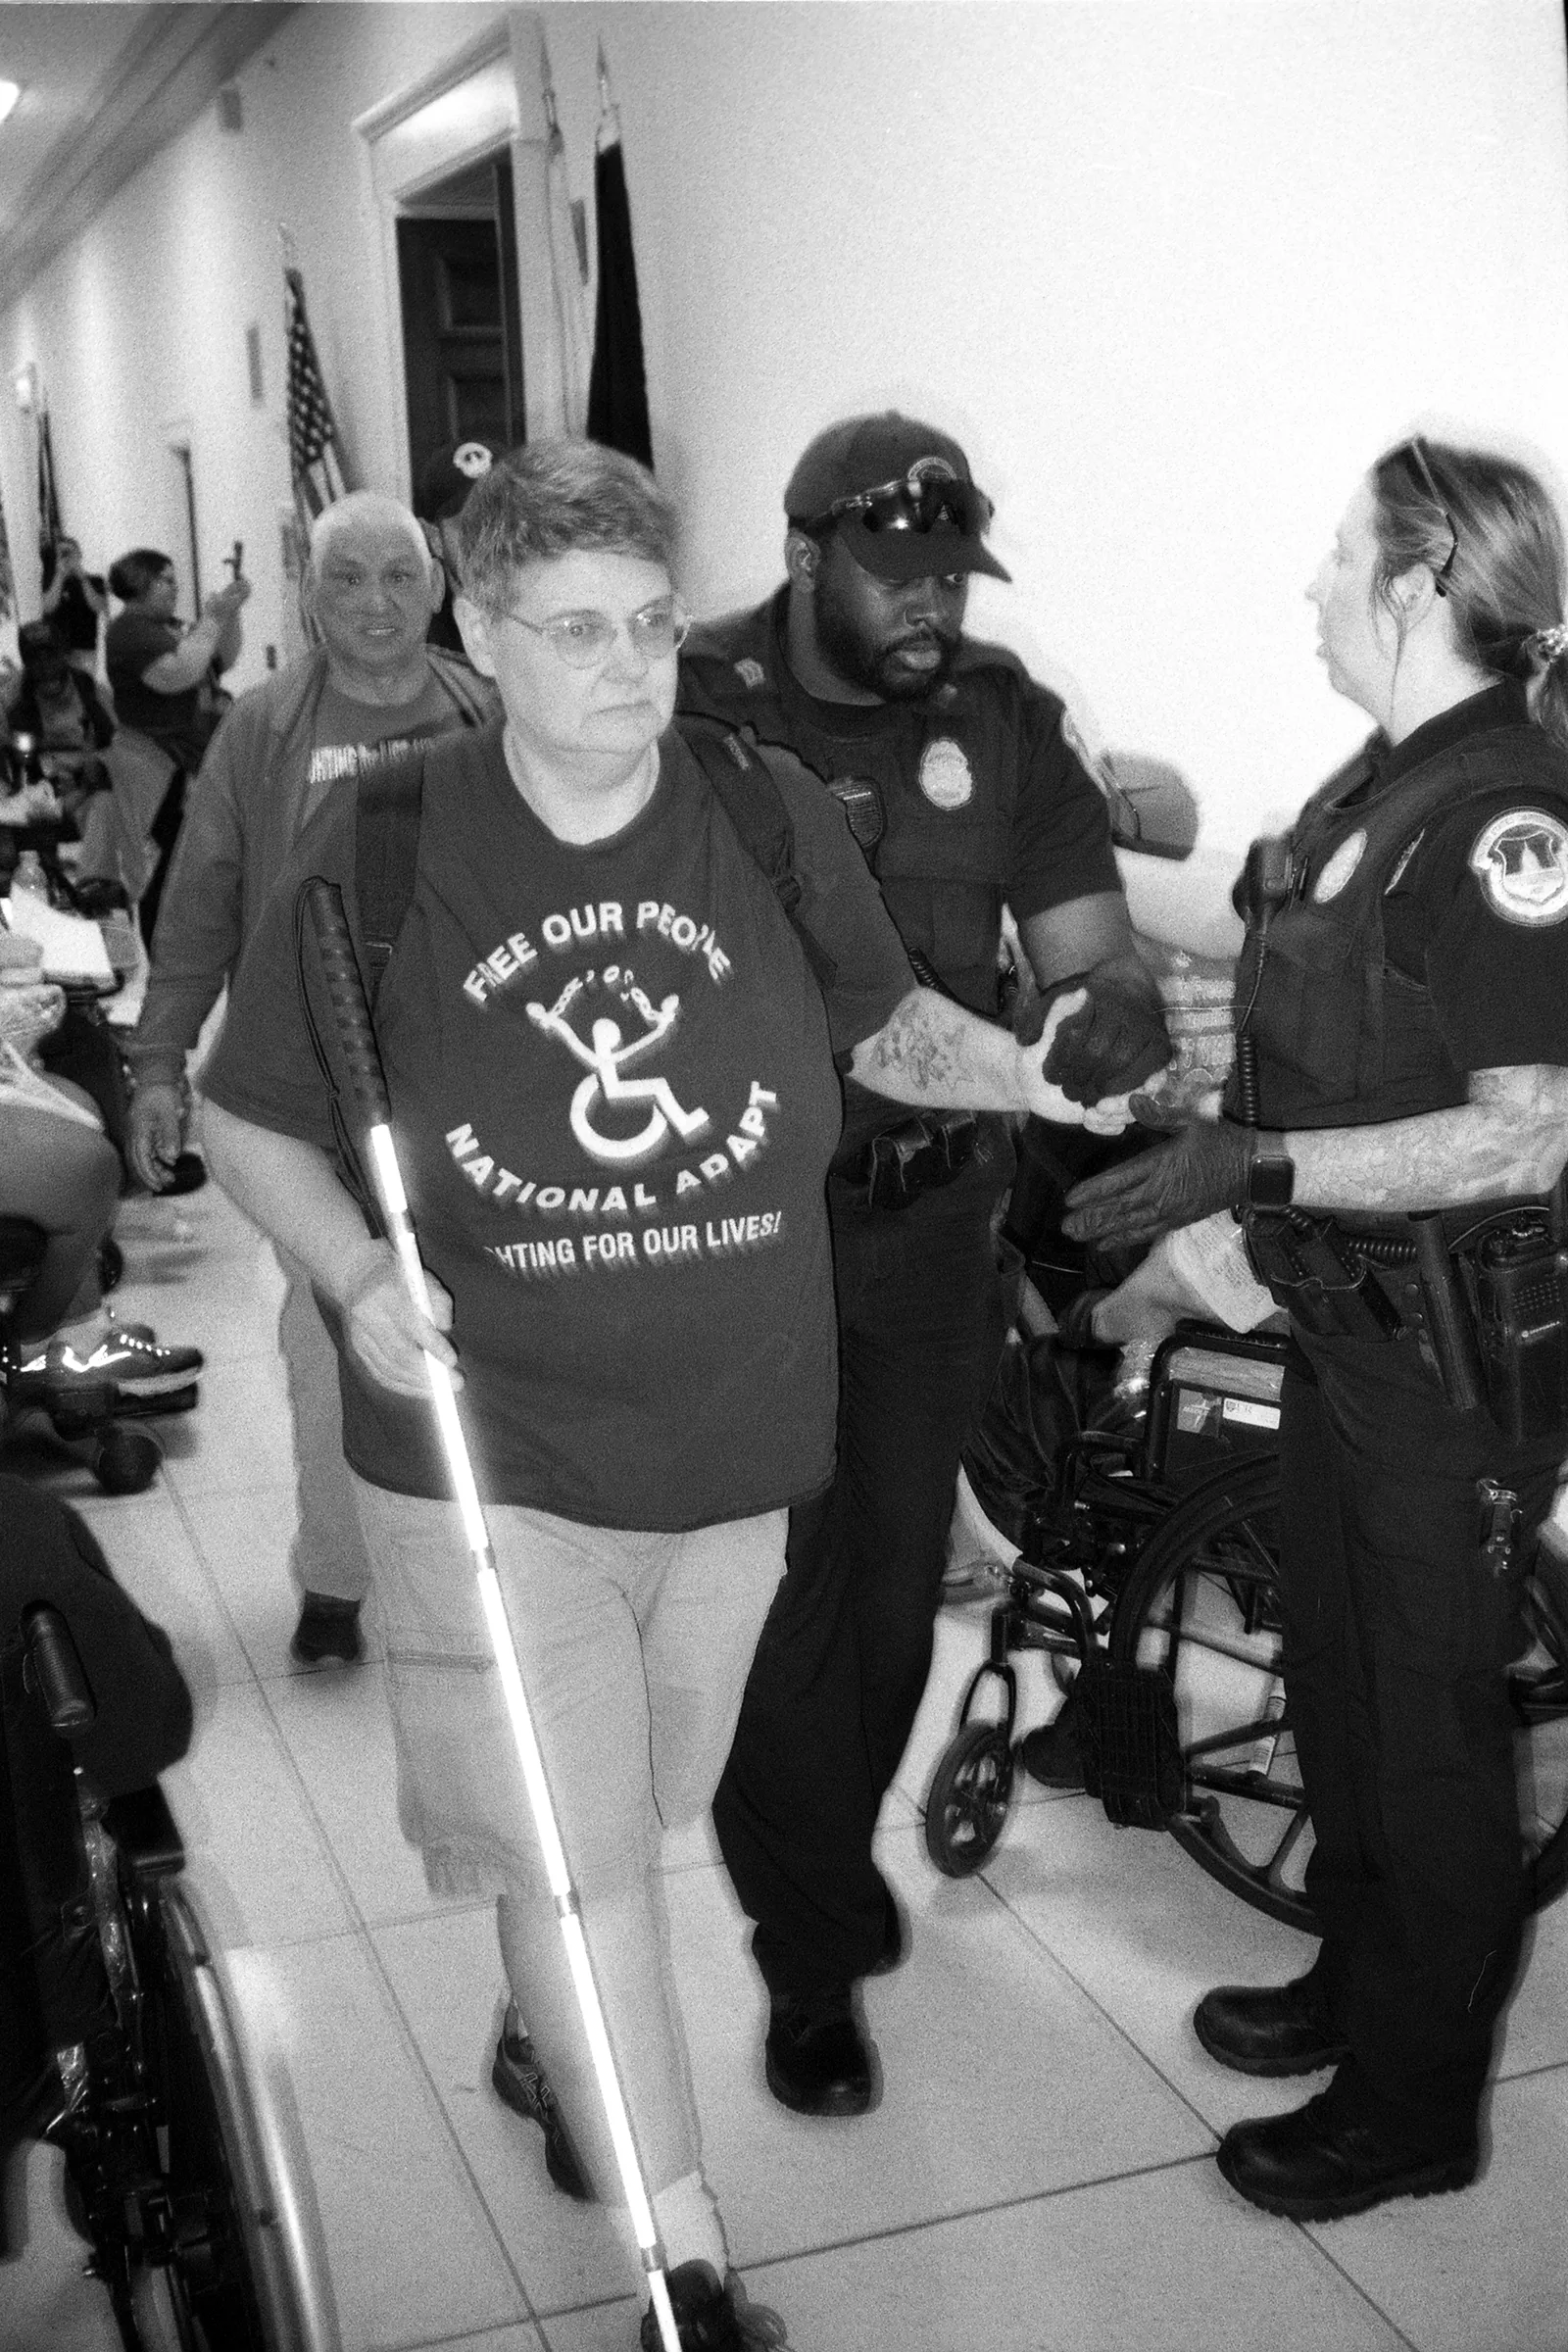 Nolan Trowe’s Wheelchair Perspective Highlights Disability Activism